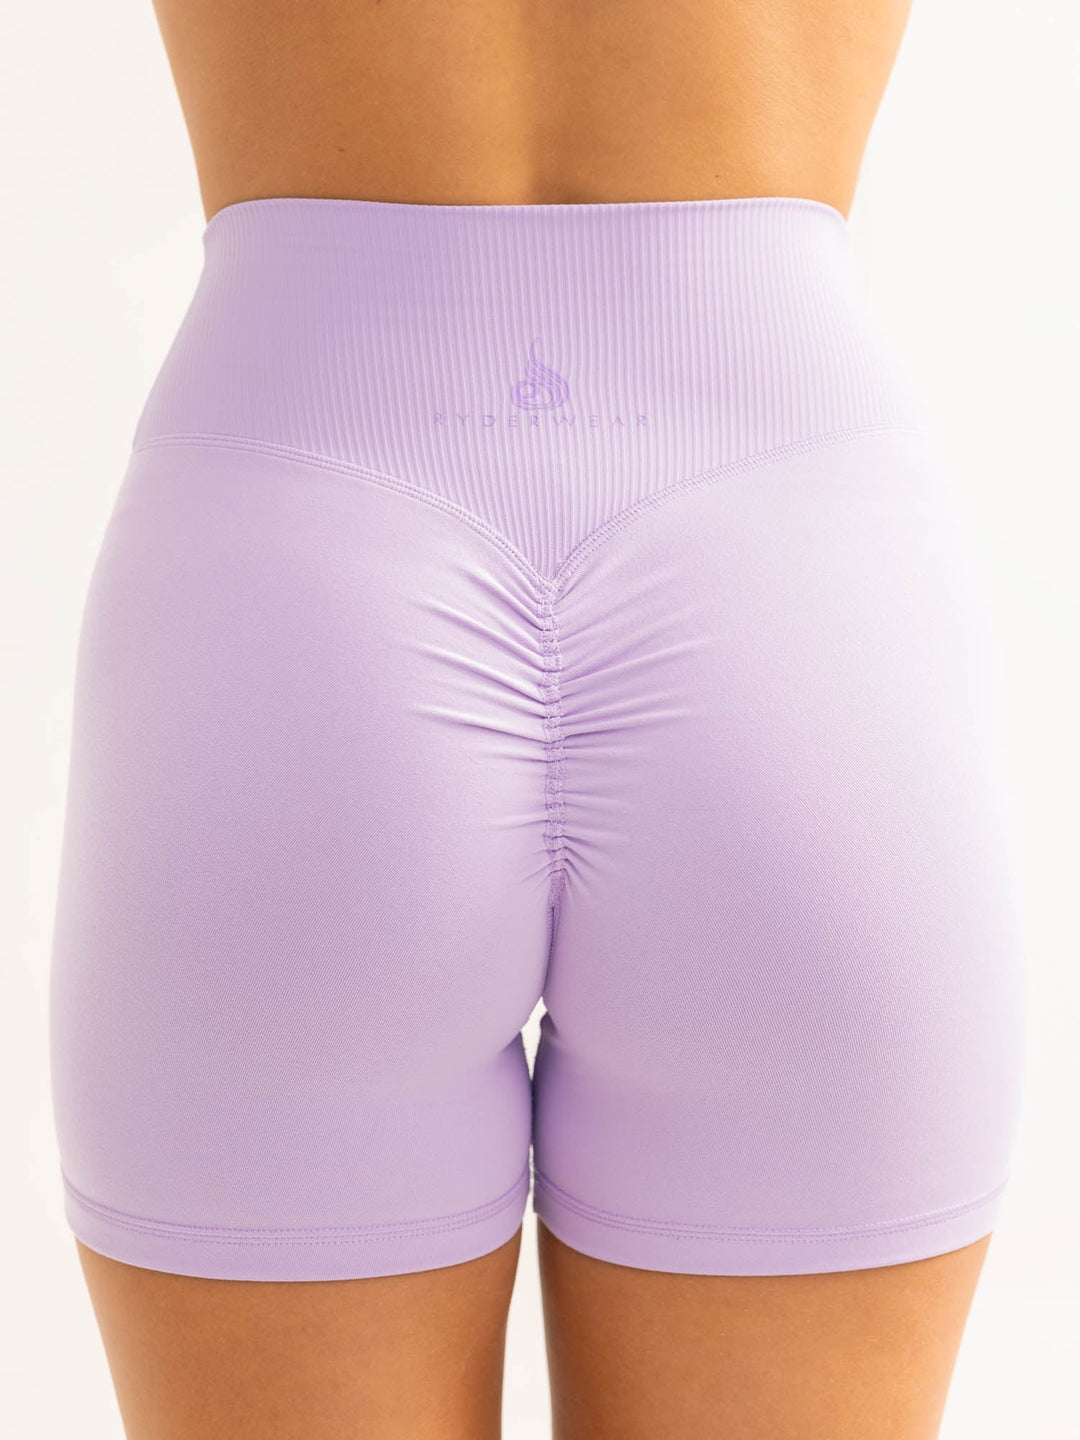 Activate Cross Over Scrunch Shorts - Lavender Clothing Ryderwear 